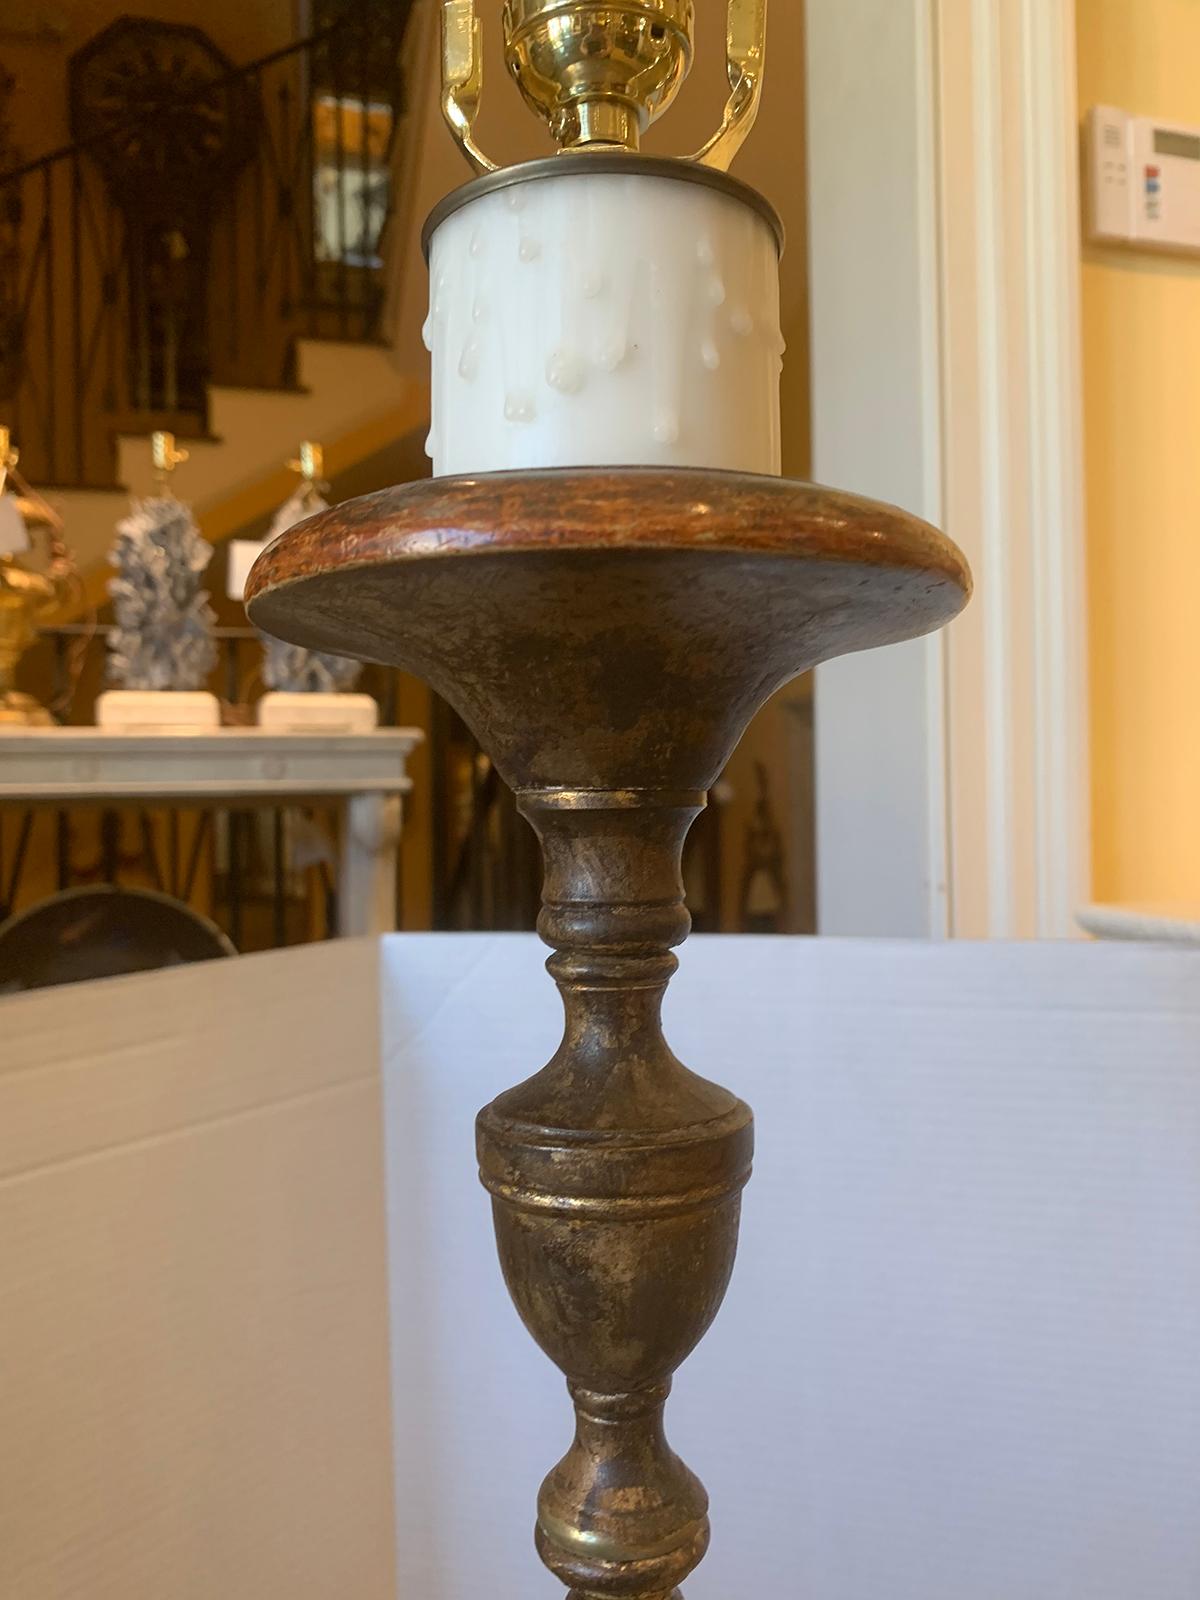 19th Century Italian Polychrome Pricket Candlestick as Floor Lamp For Sale 3